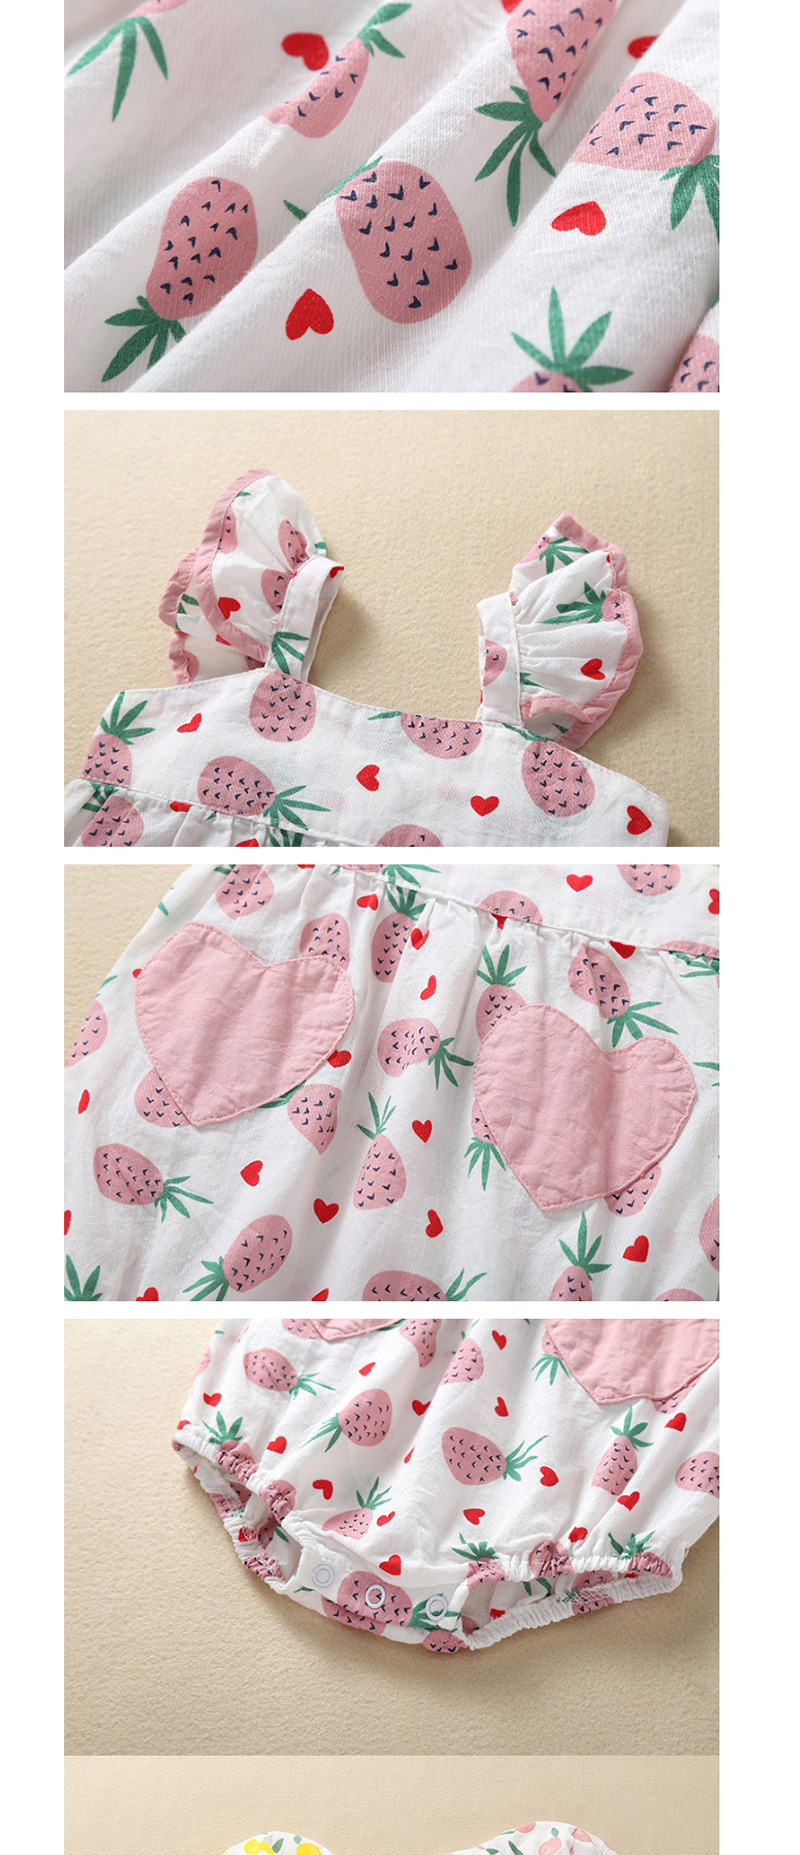 Fashion Pink Pineapple Fruit Print Love Patch Pocket Baby Triangle Lace,Kids Clothing